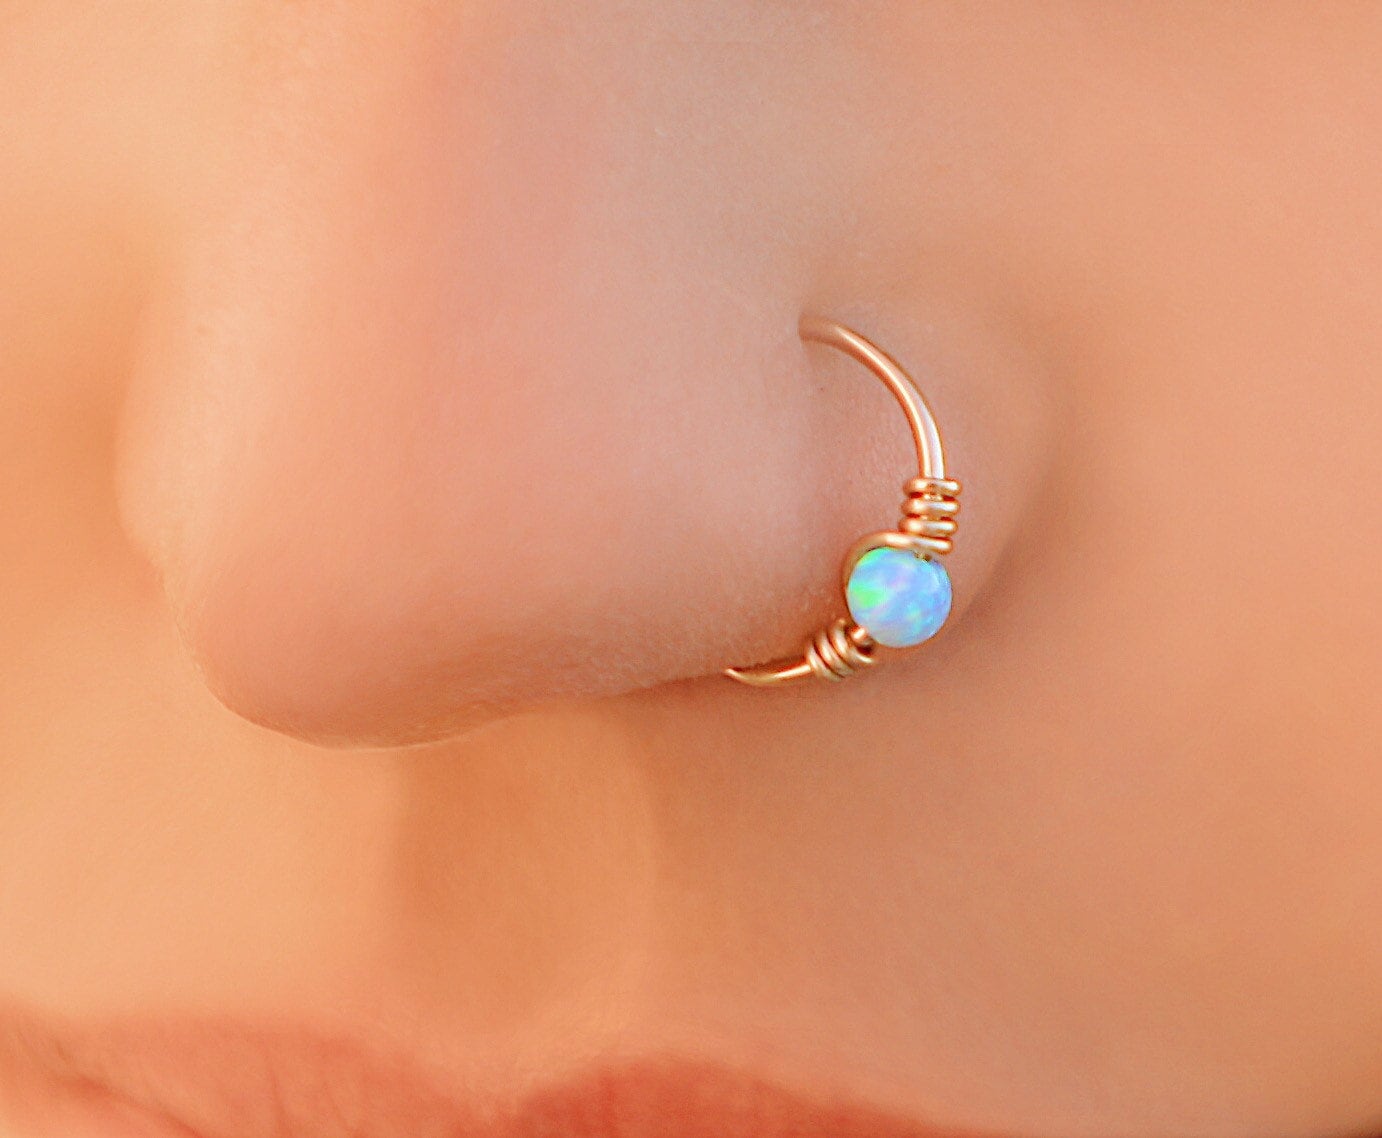 Price: 9326.00 Rs Opal nose ring - Thin 14k Gold Filled Tiny White Opal Nose  p